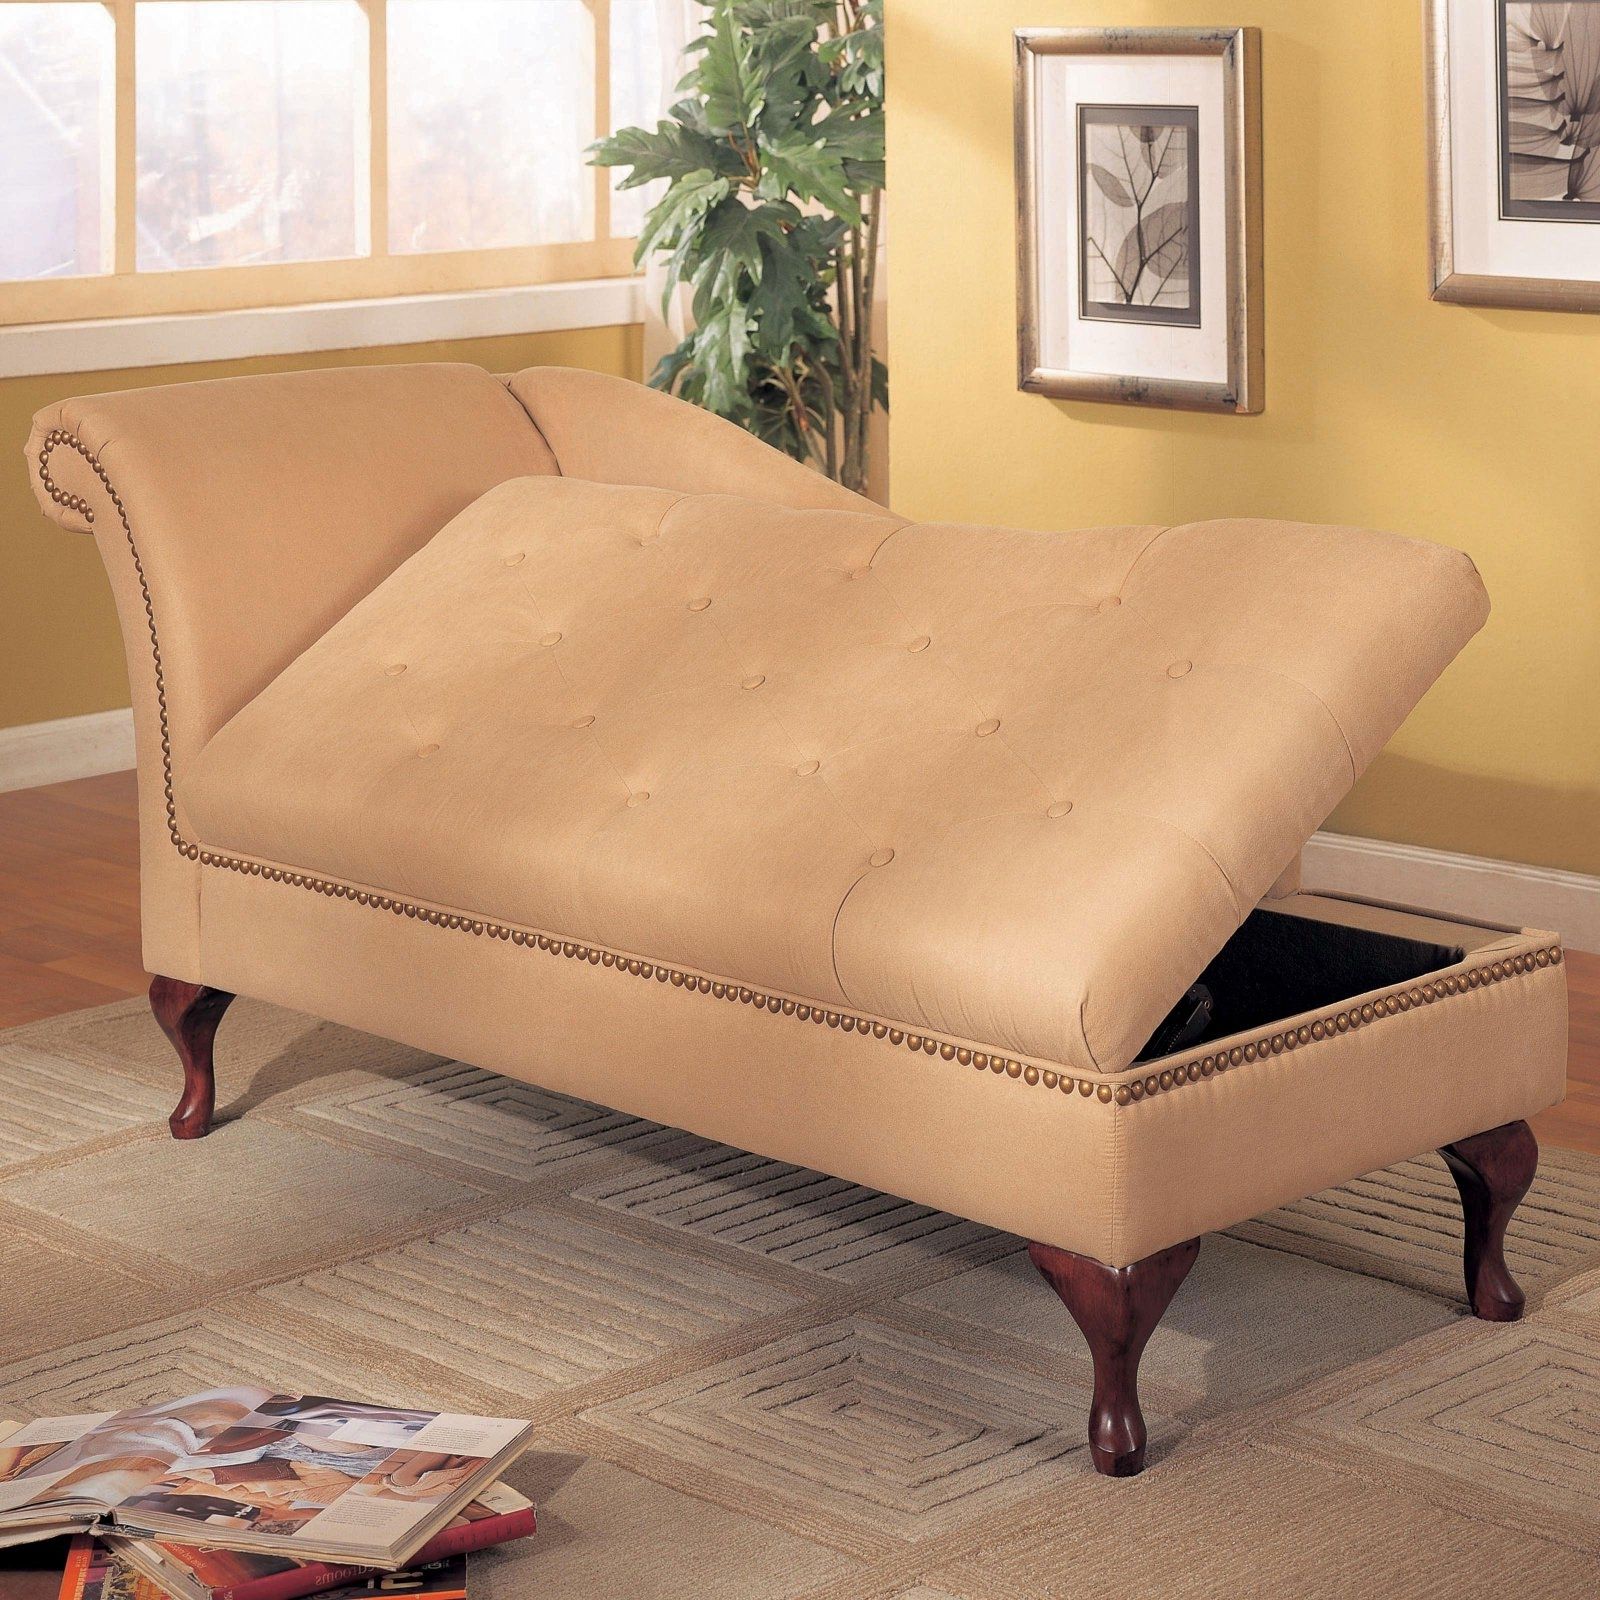 Most Recent Indoor Chaise › Indoor Chaise Lounge With Storage Chaise Lounges Regarding Chaise Lounge Chairs With Storage (View 1 of 15)